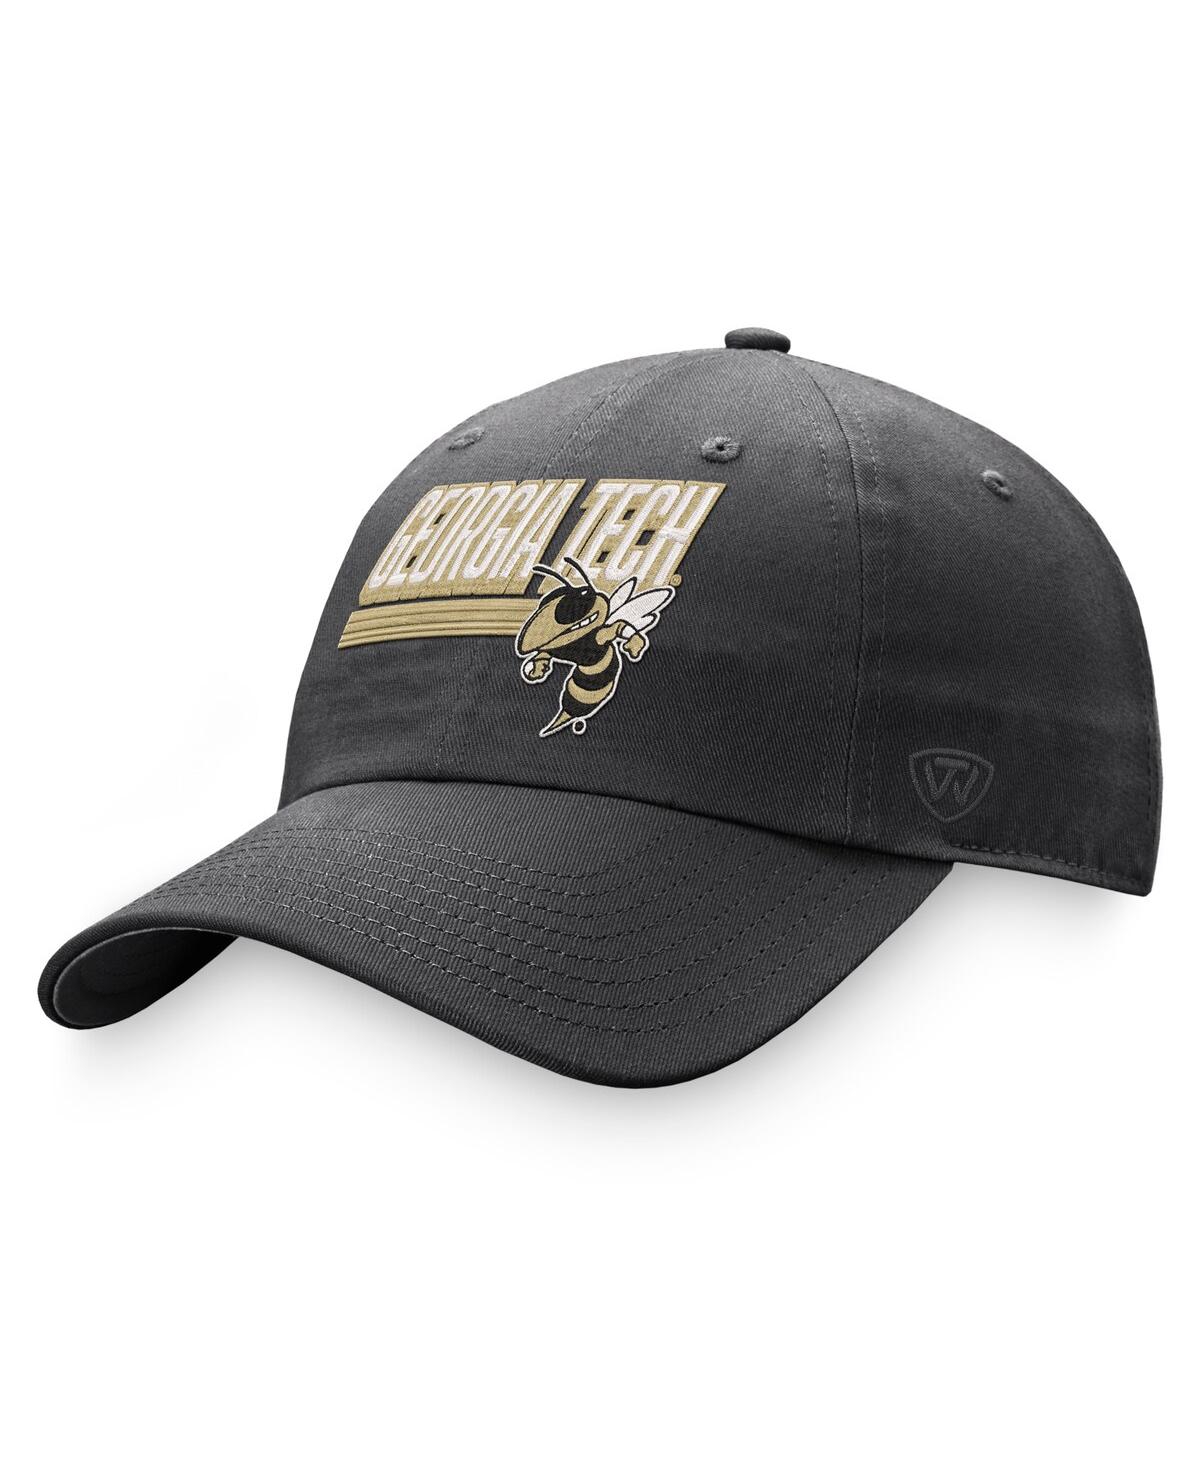 Men's Top of the World Charcoal Georgia Tech Yellow Jackets Slice Adjustable Hat - Charcoal